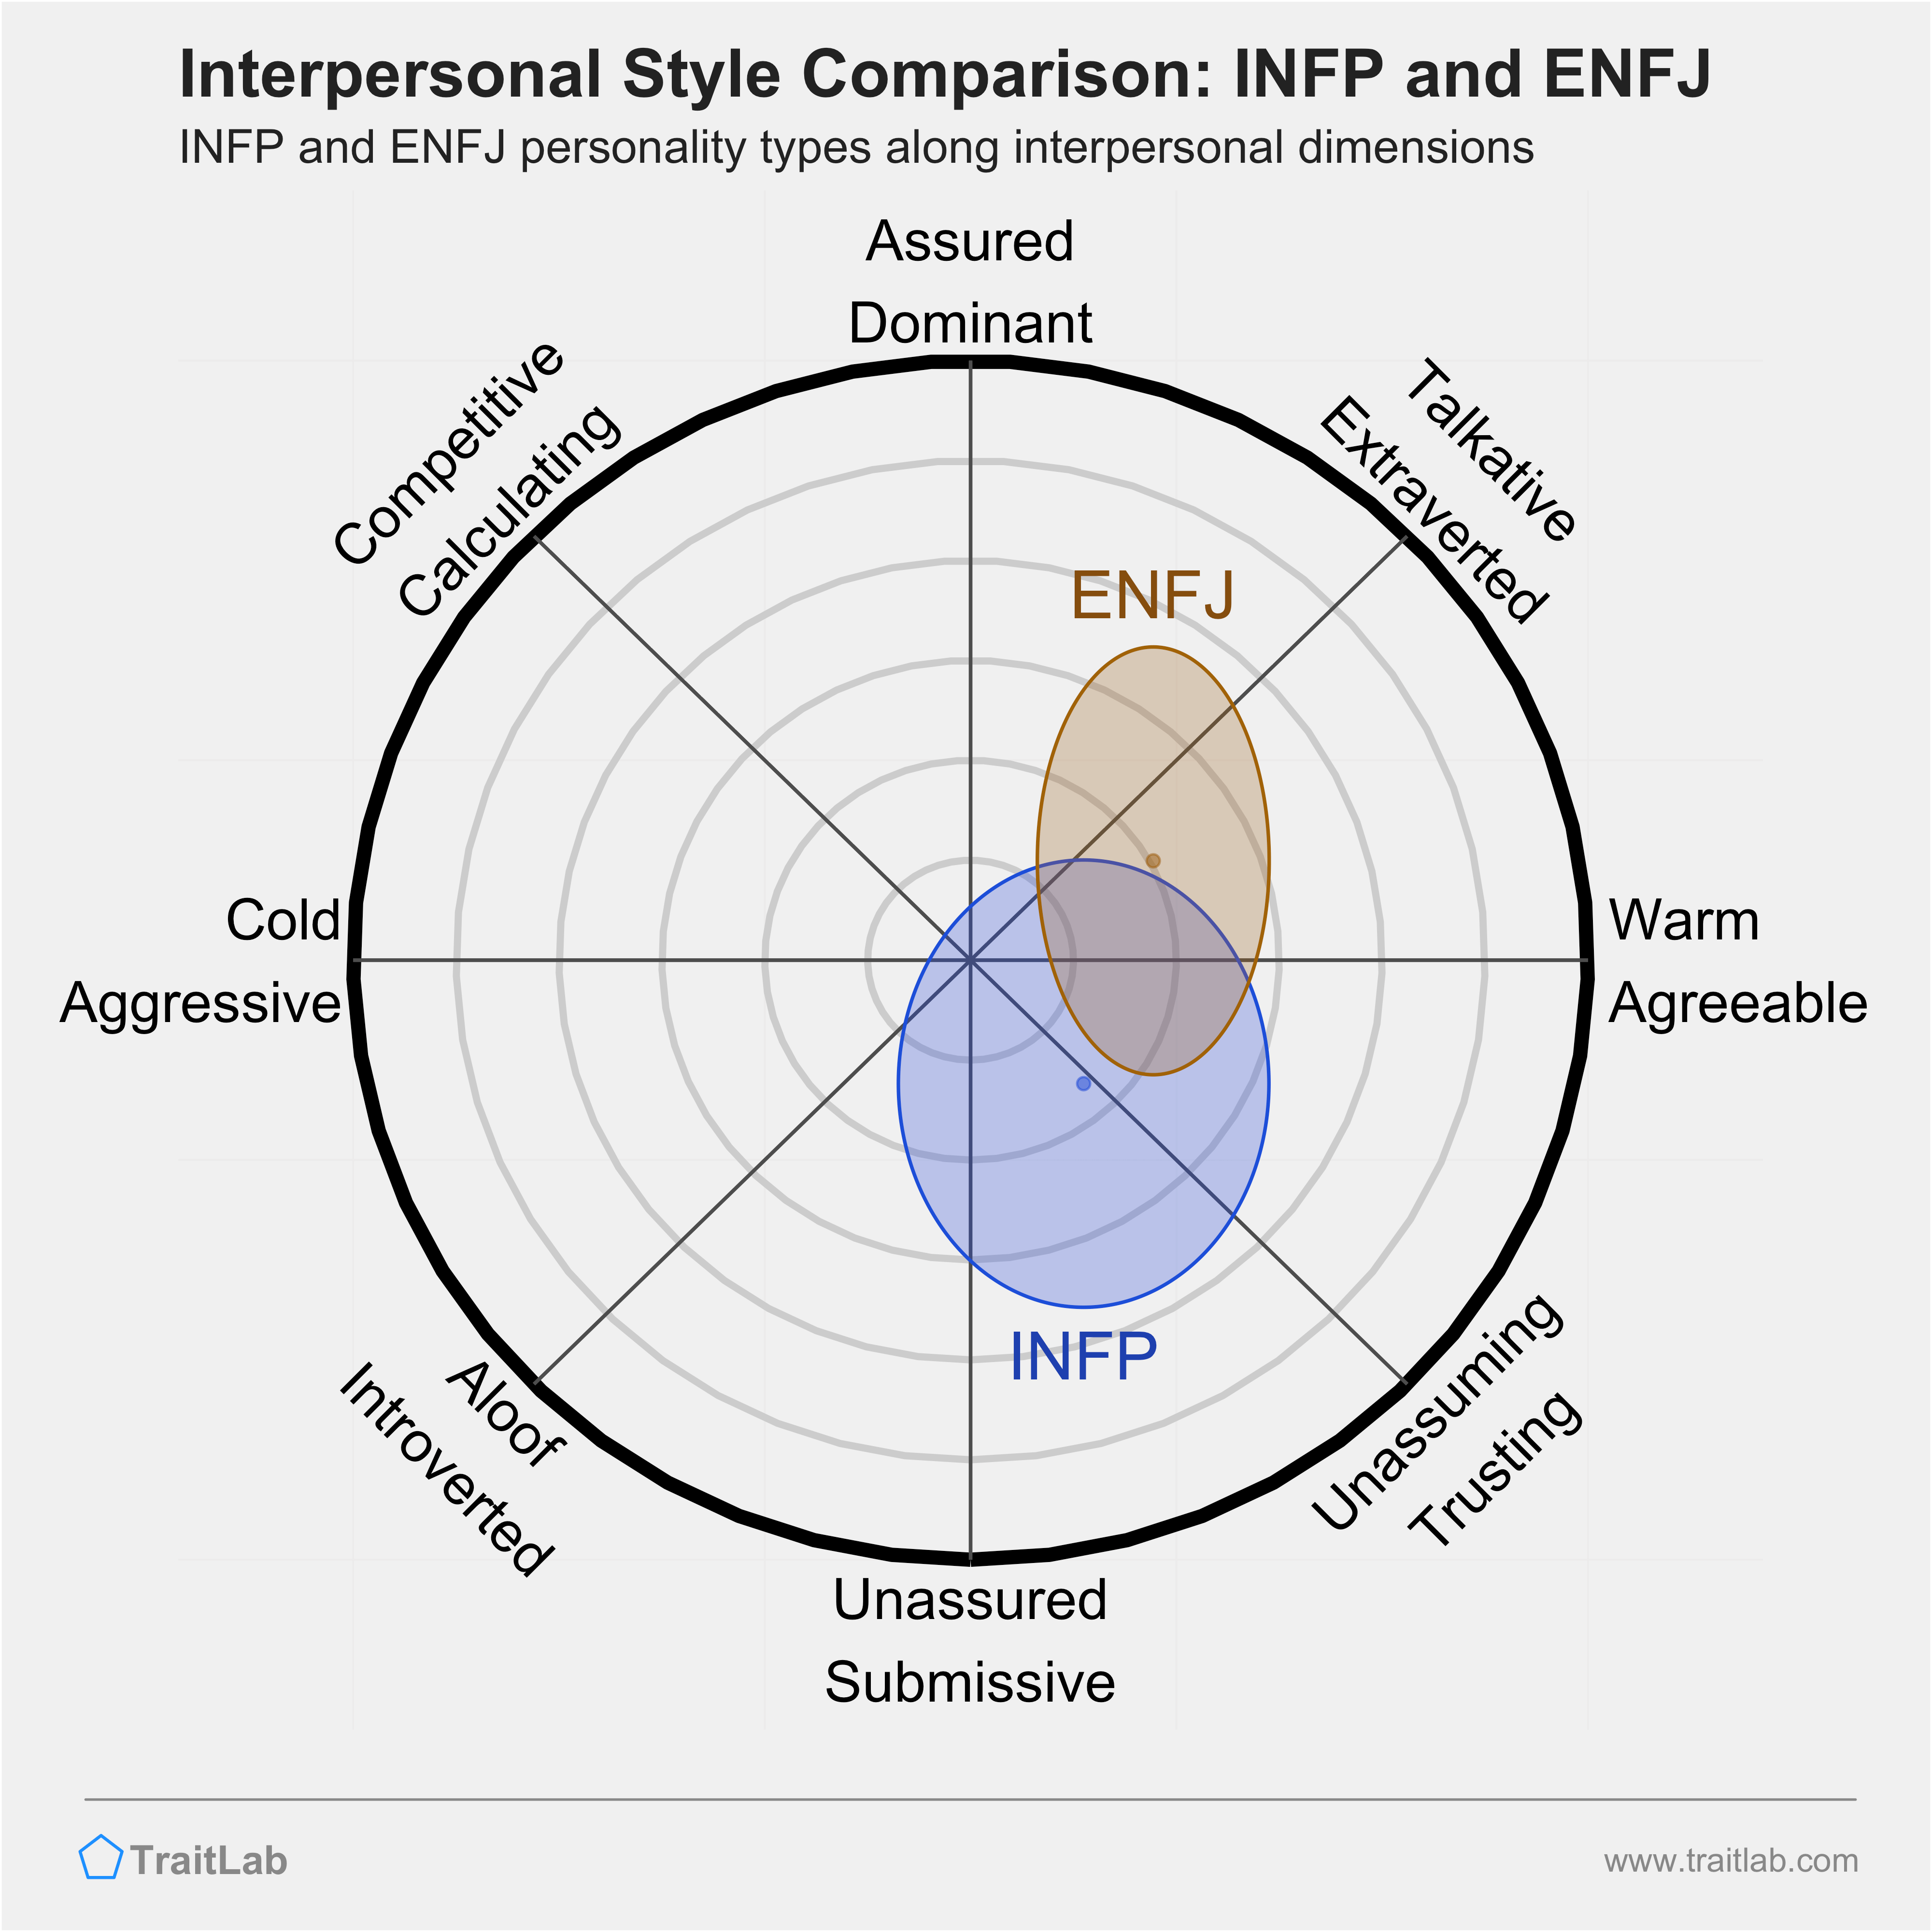 INFP and ENFJ comparison across interpersonal dimensions